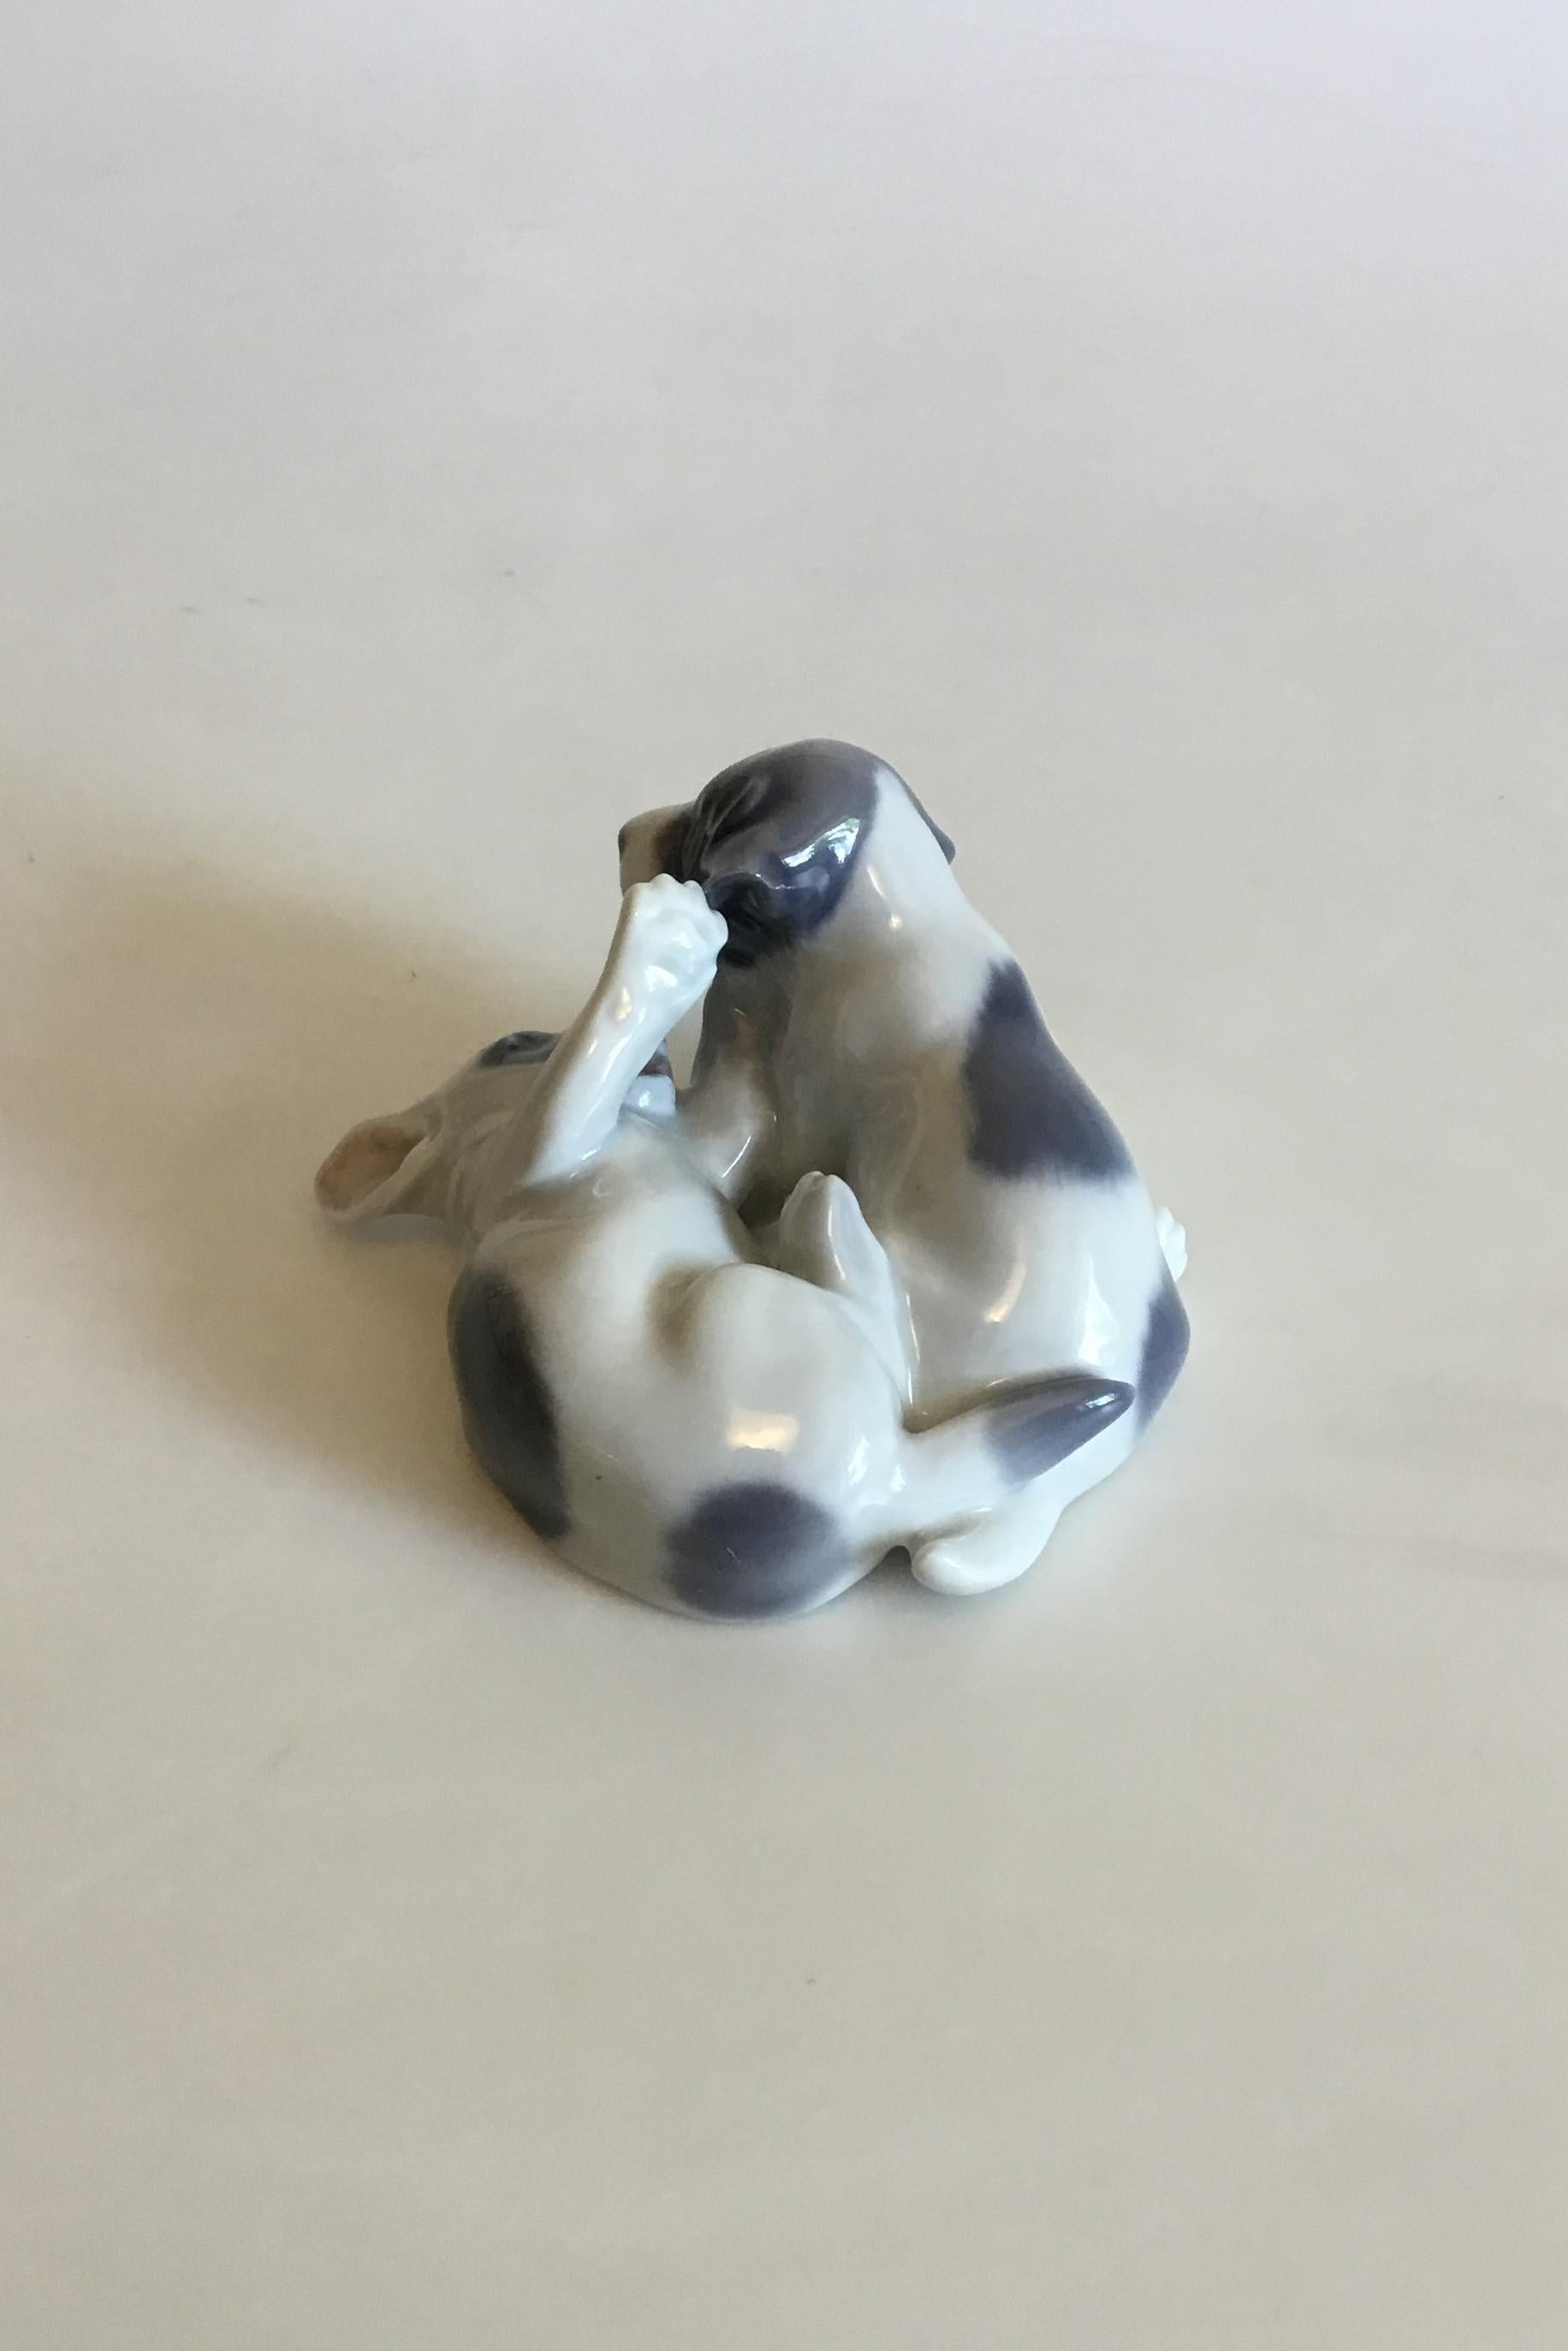 Royal Copenhagen figurine pointer Puppies Playing No 453. Measures: 9 cm / 3 35/64 in. and is in good condition. Designed by Erik Nielsen.